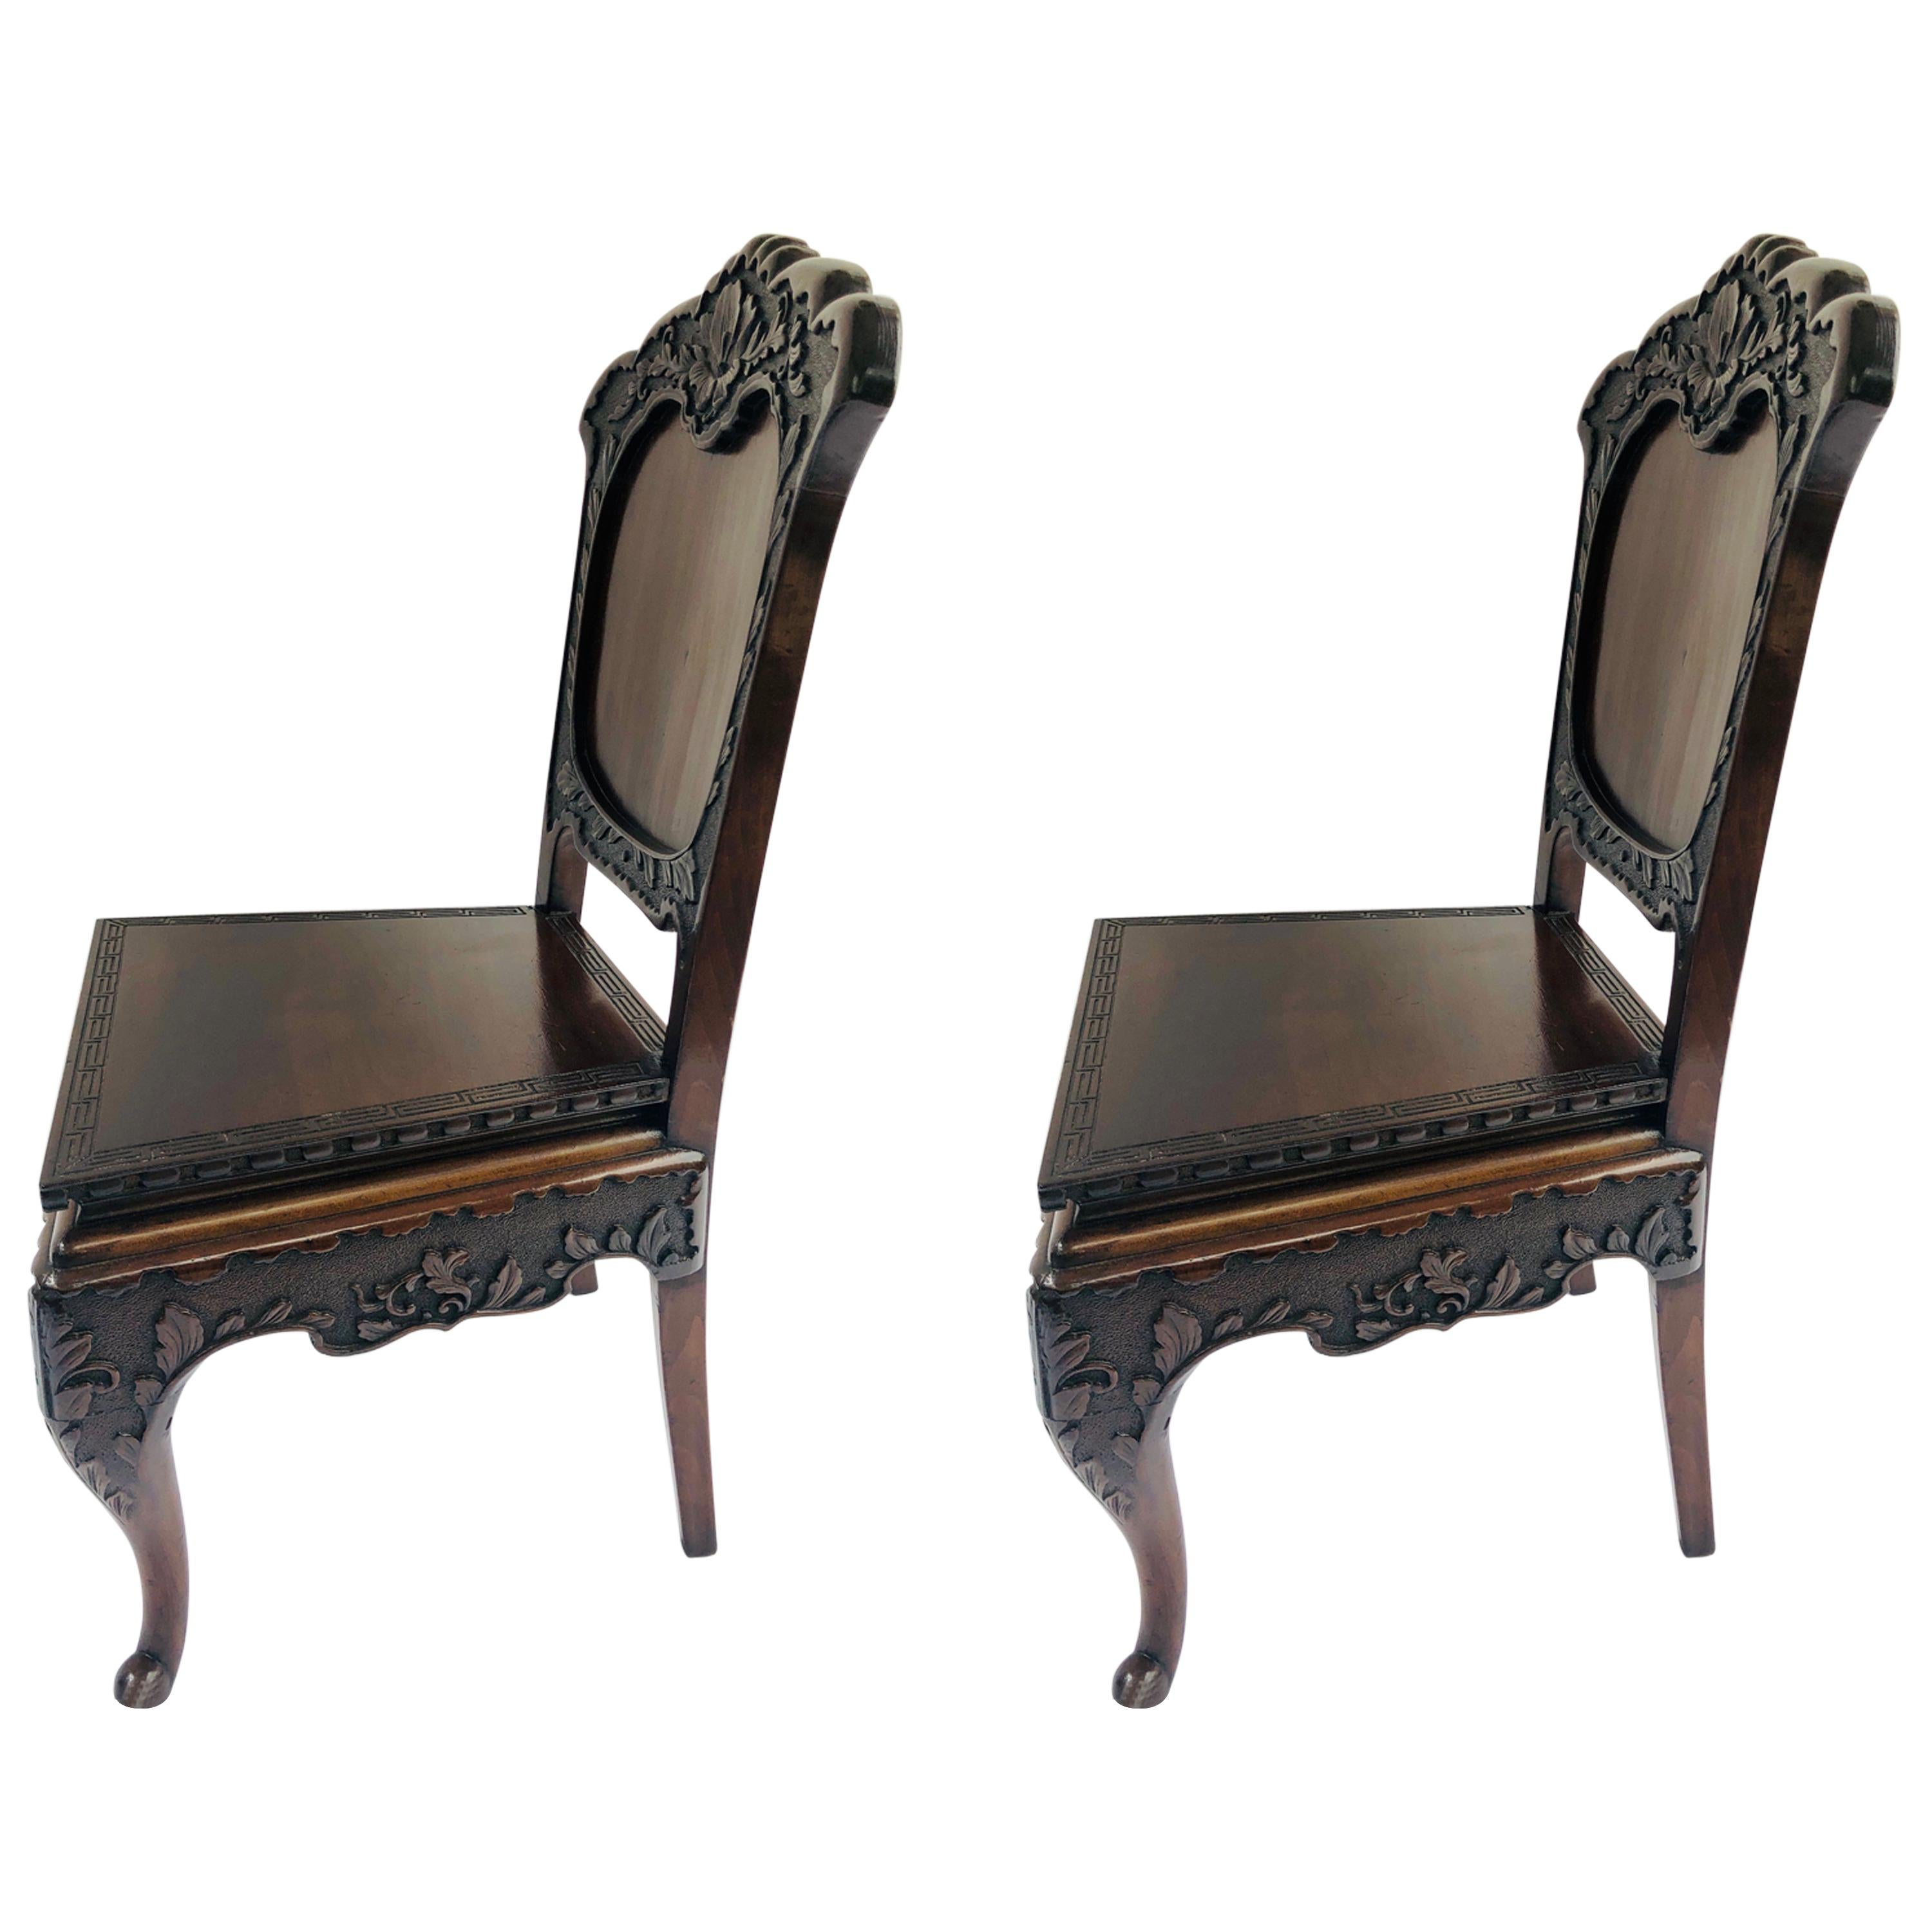 Fine pair of antique carved Chinese hall chairs having fine carved paneled fronts depicting a flower and leaf design. The carved front rail depicts the same leaf design. The carved shaped back boasts two bow inlays in the centre panel. They are